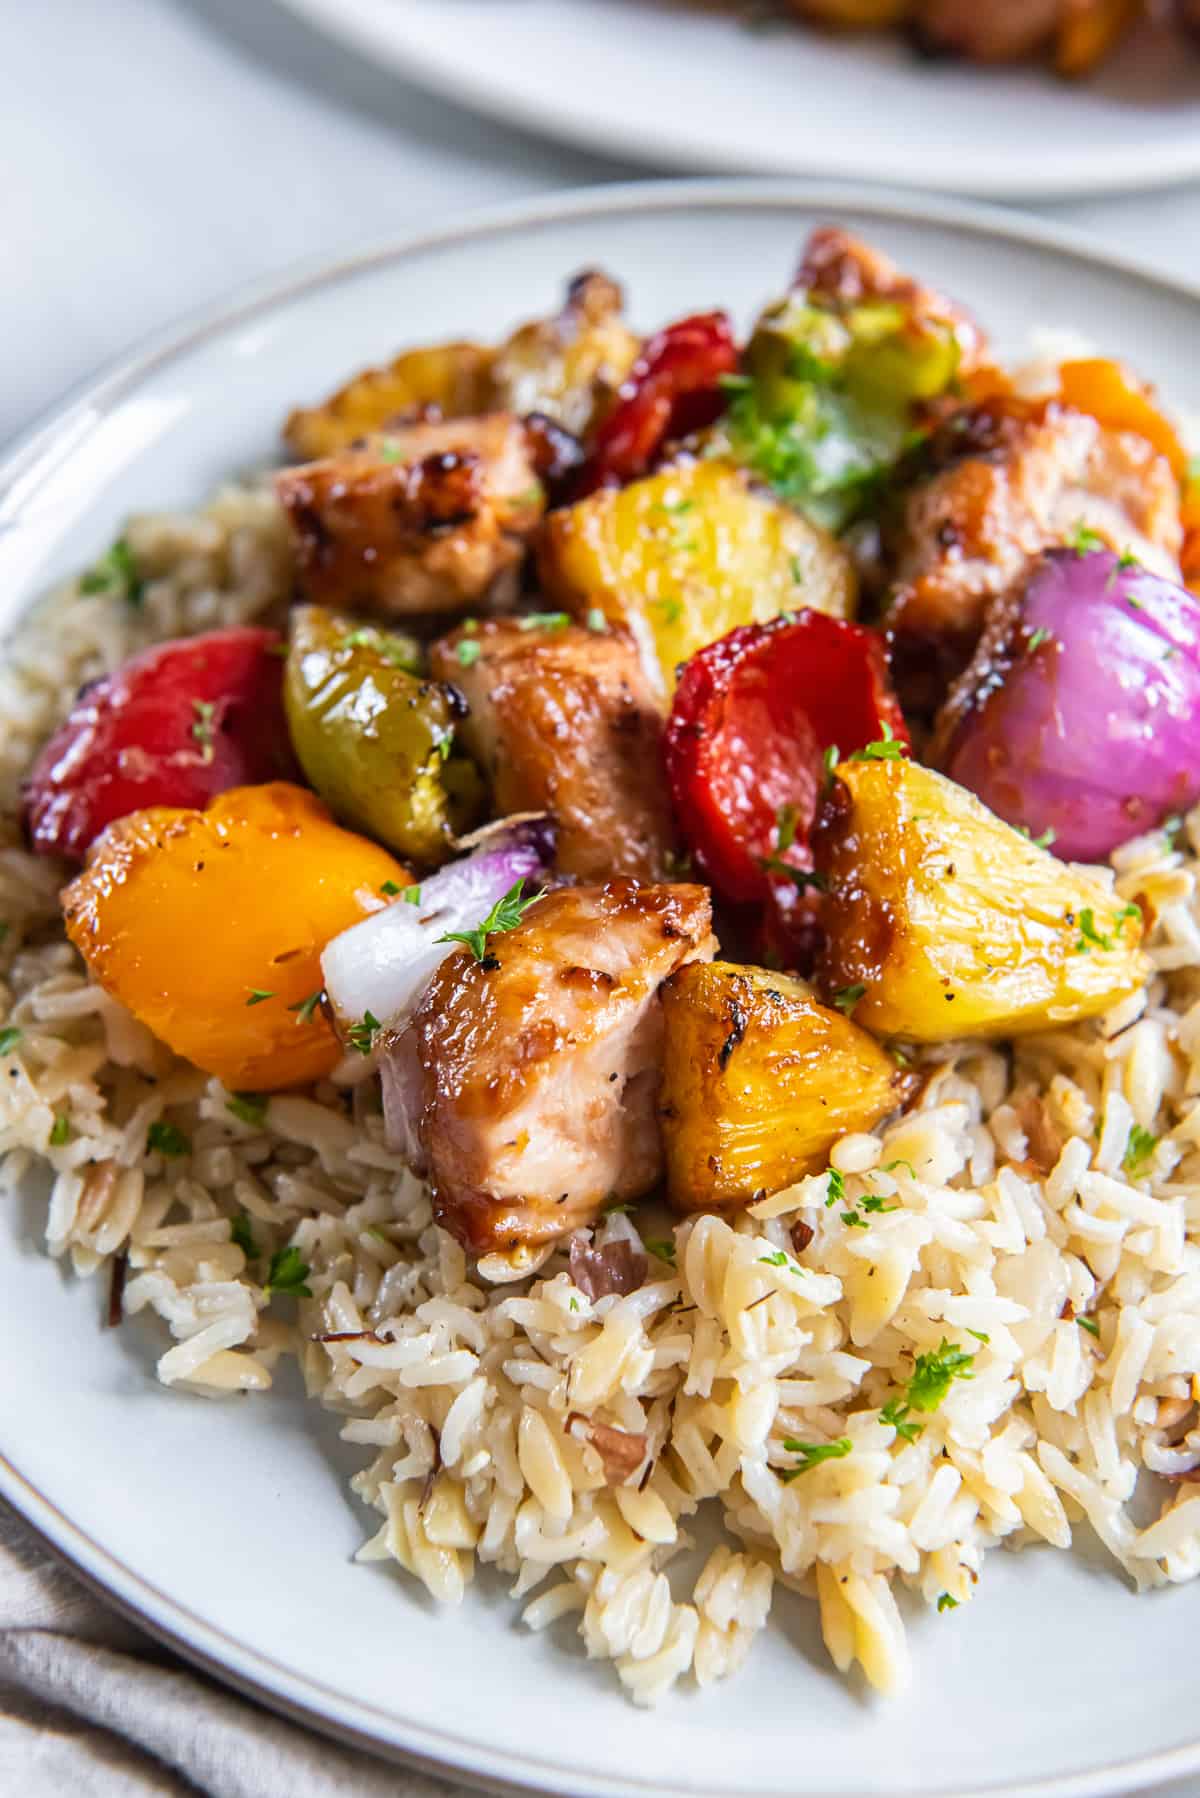 Chicken pineapple and peppers on rice on a white plate.